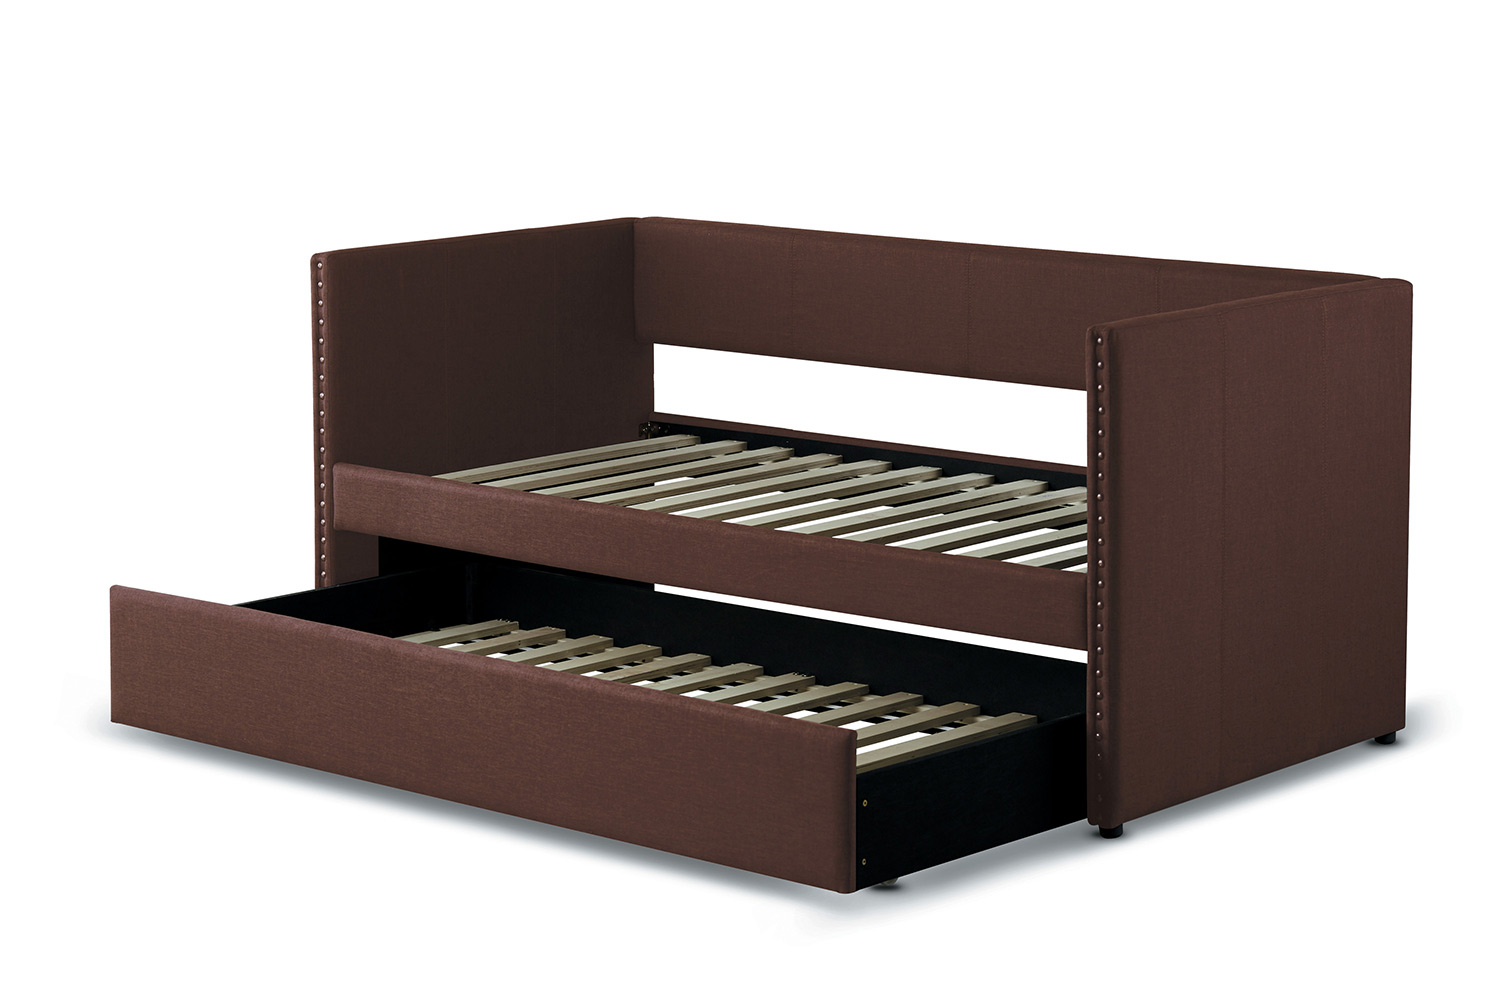 Homelegance Therese Daybed with Trundle - Chocolate